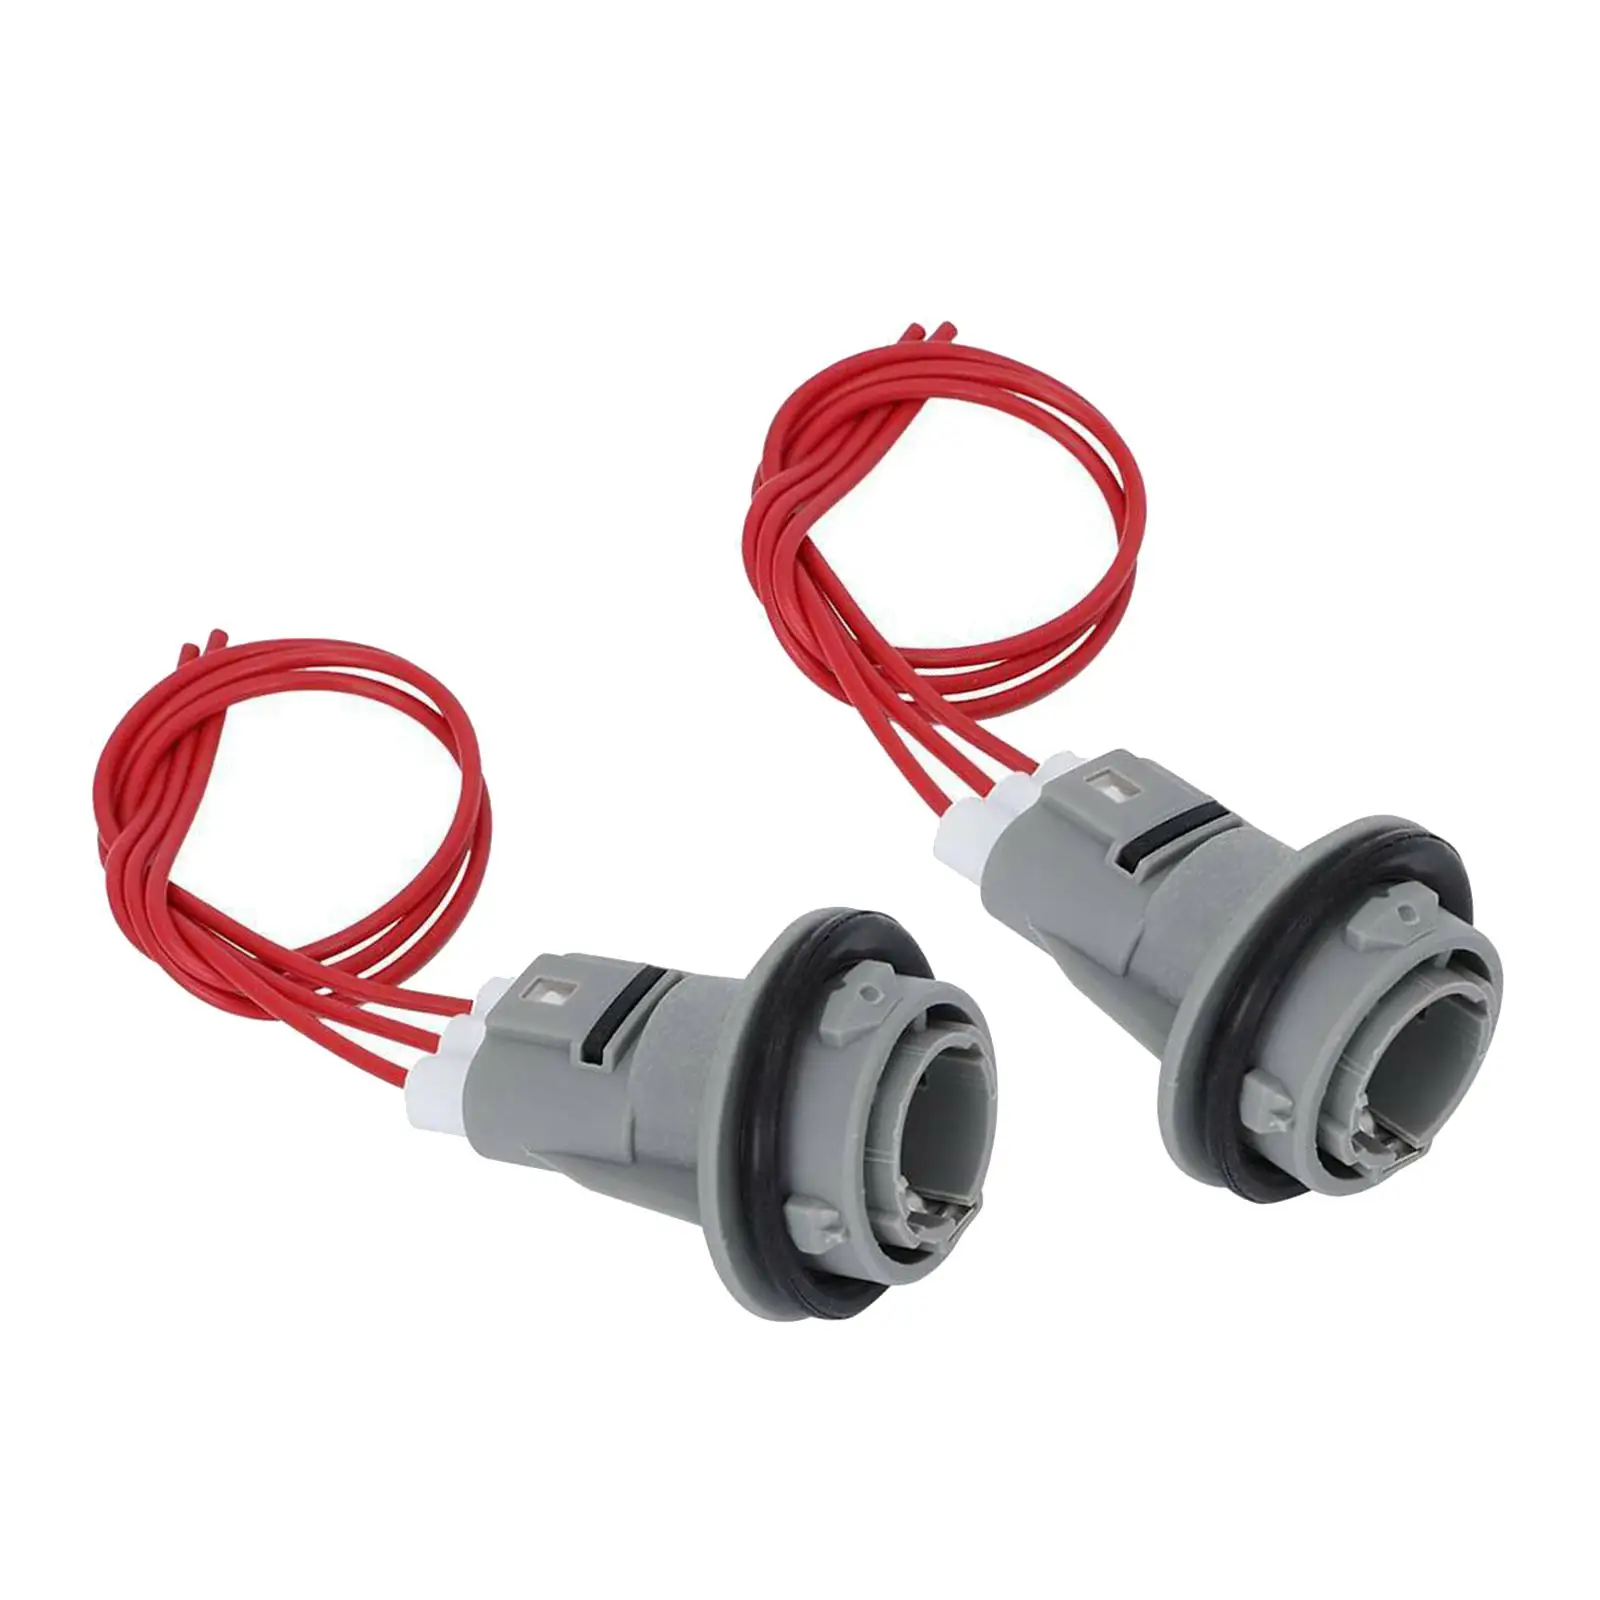 1 Pair Front Turn Signal Blinker Light Bulb Socket & Connector Harness 33302-Sr3-A01 Kit 3-Wire for Honda Acura Accord